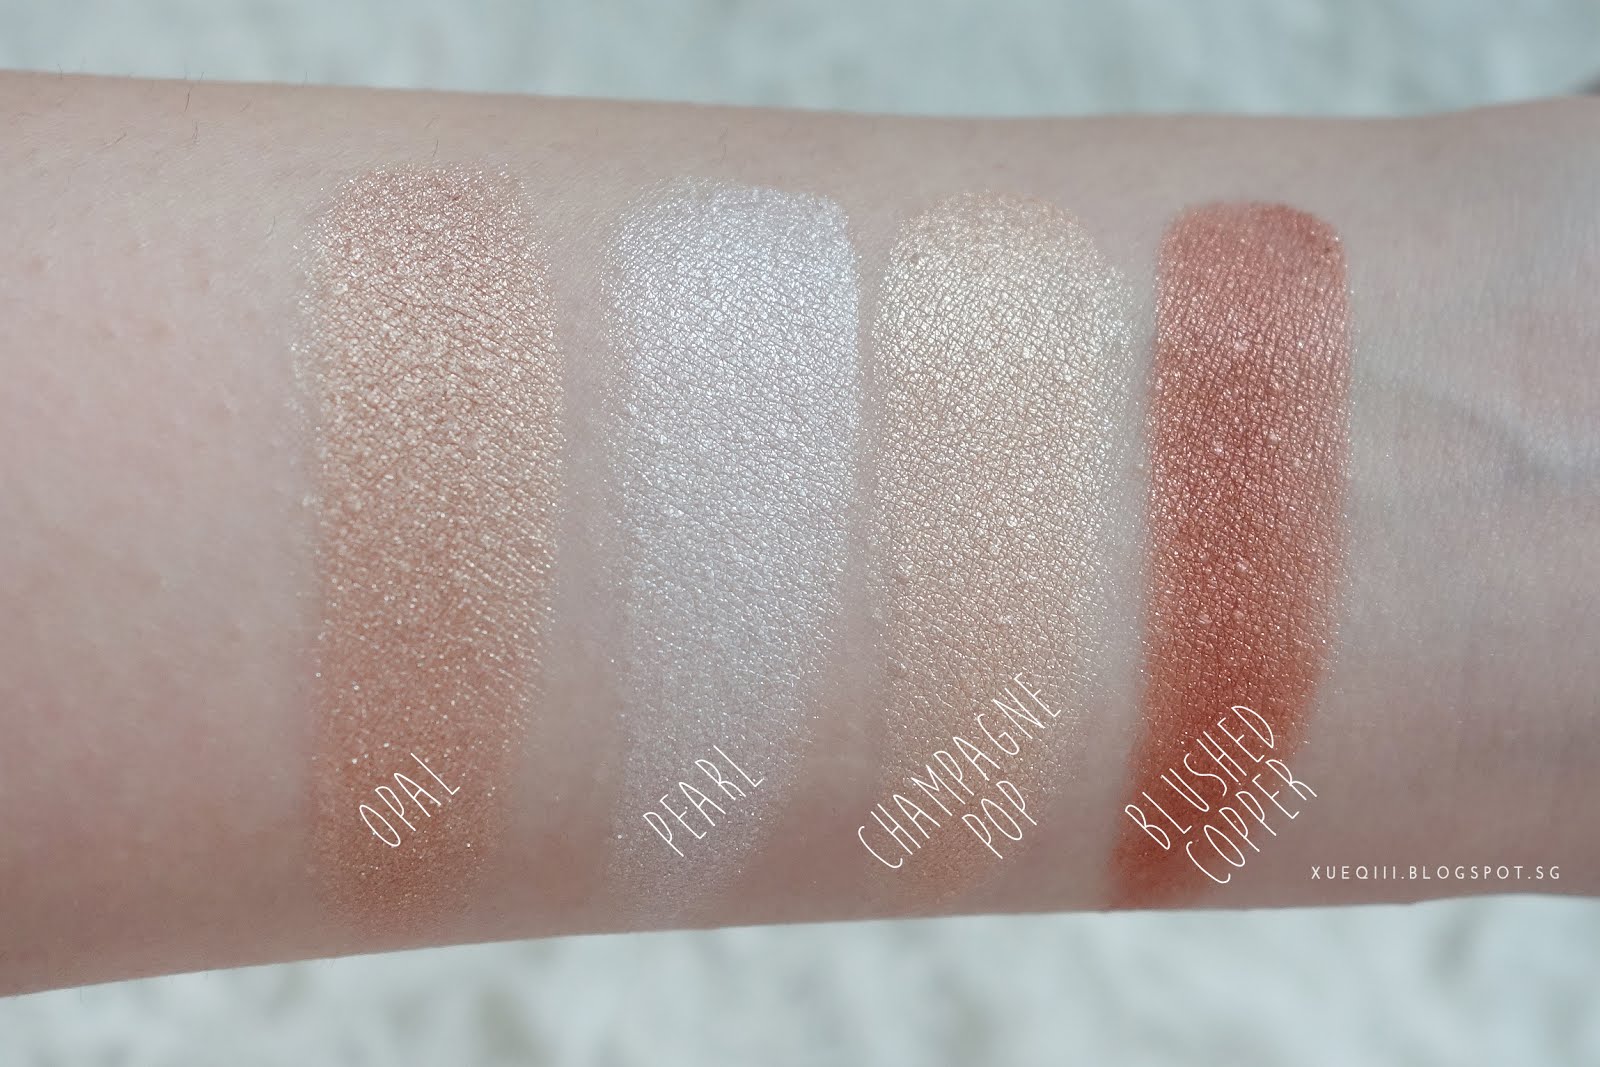 Becca Shimmering Skin Perfector Pressed in Opal Review and Swatches.